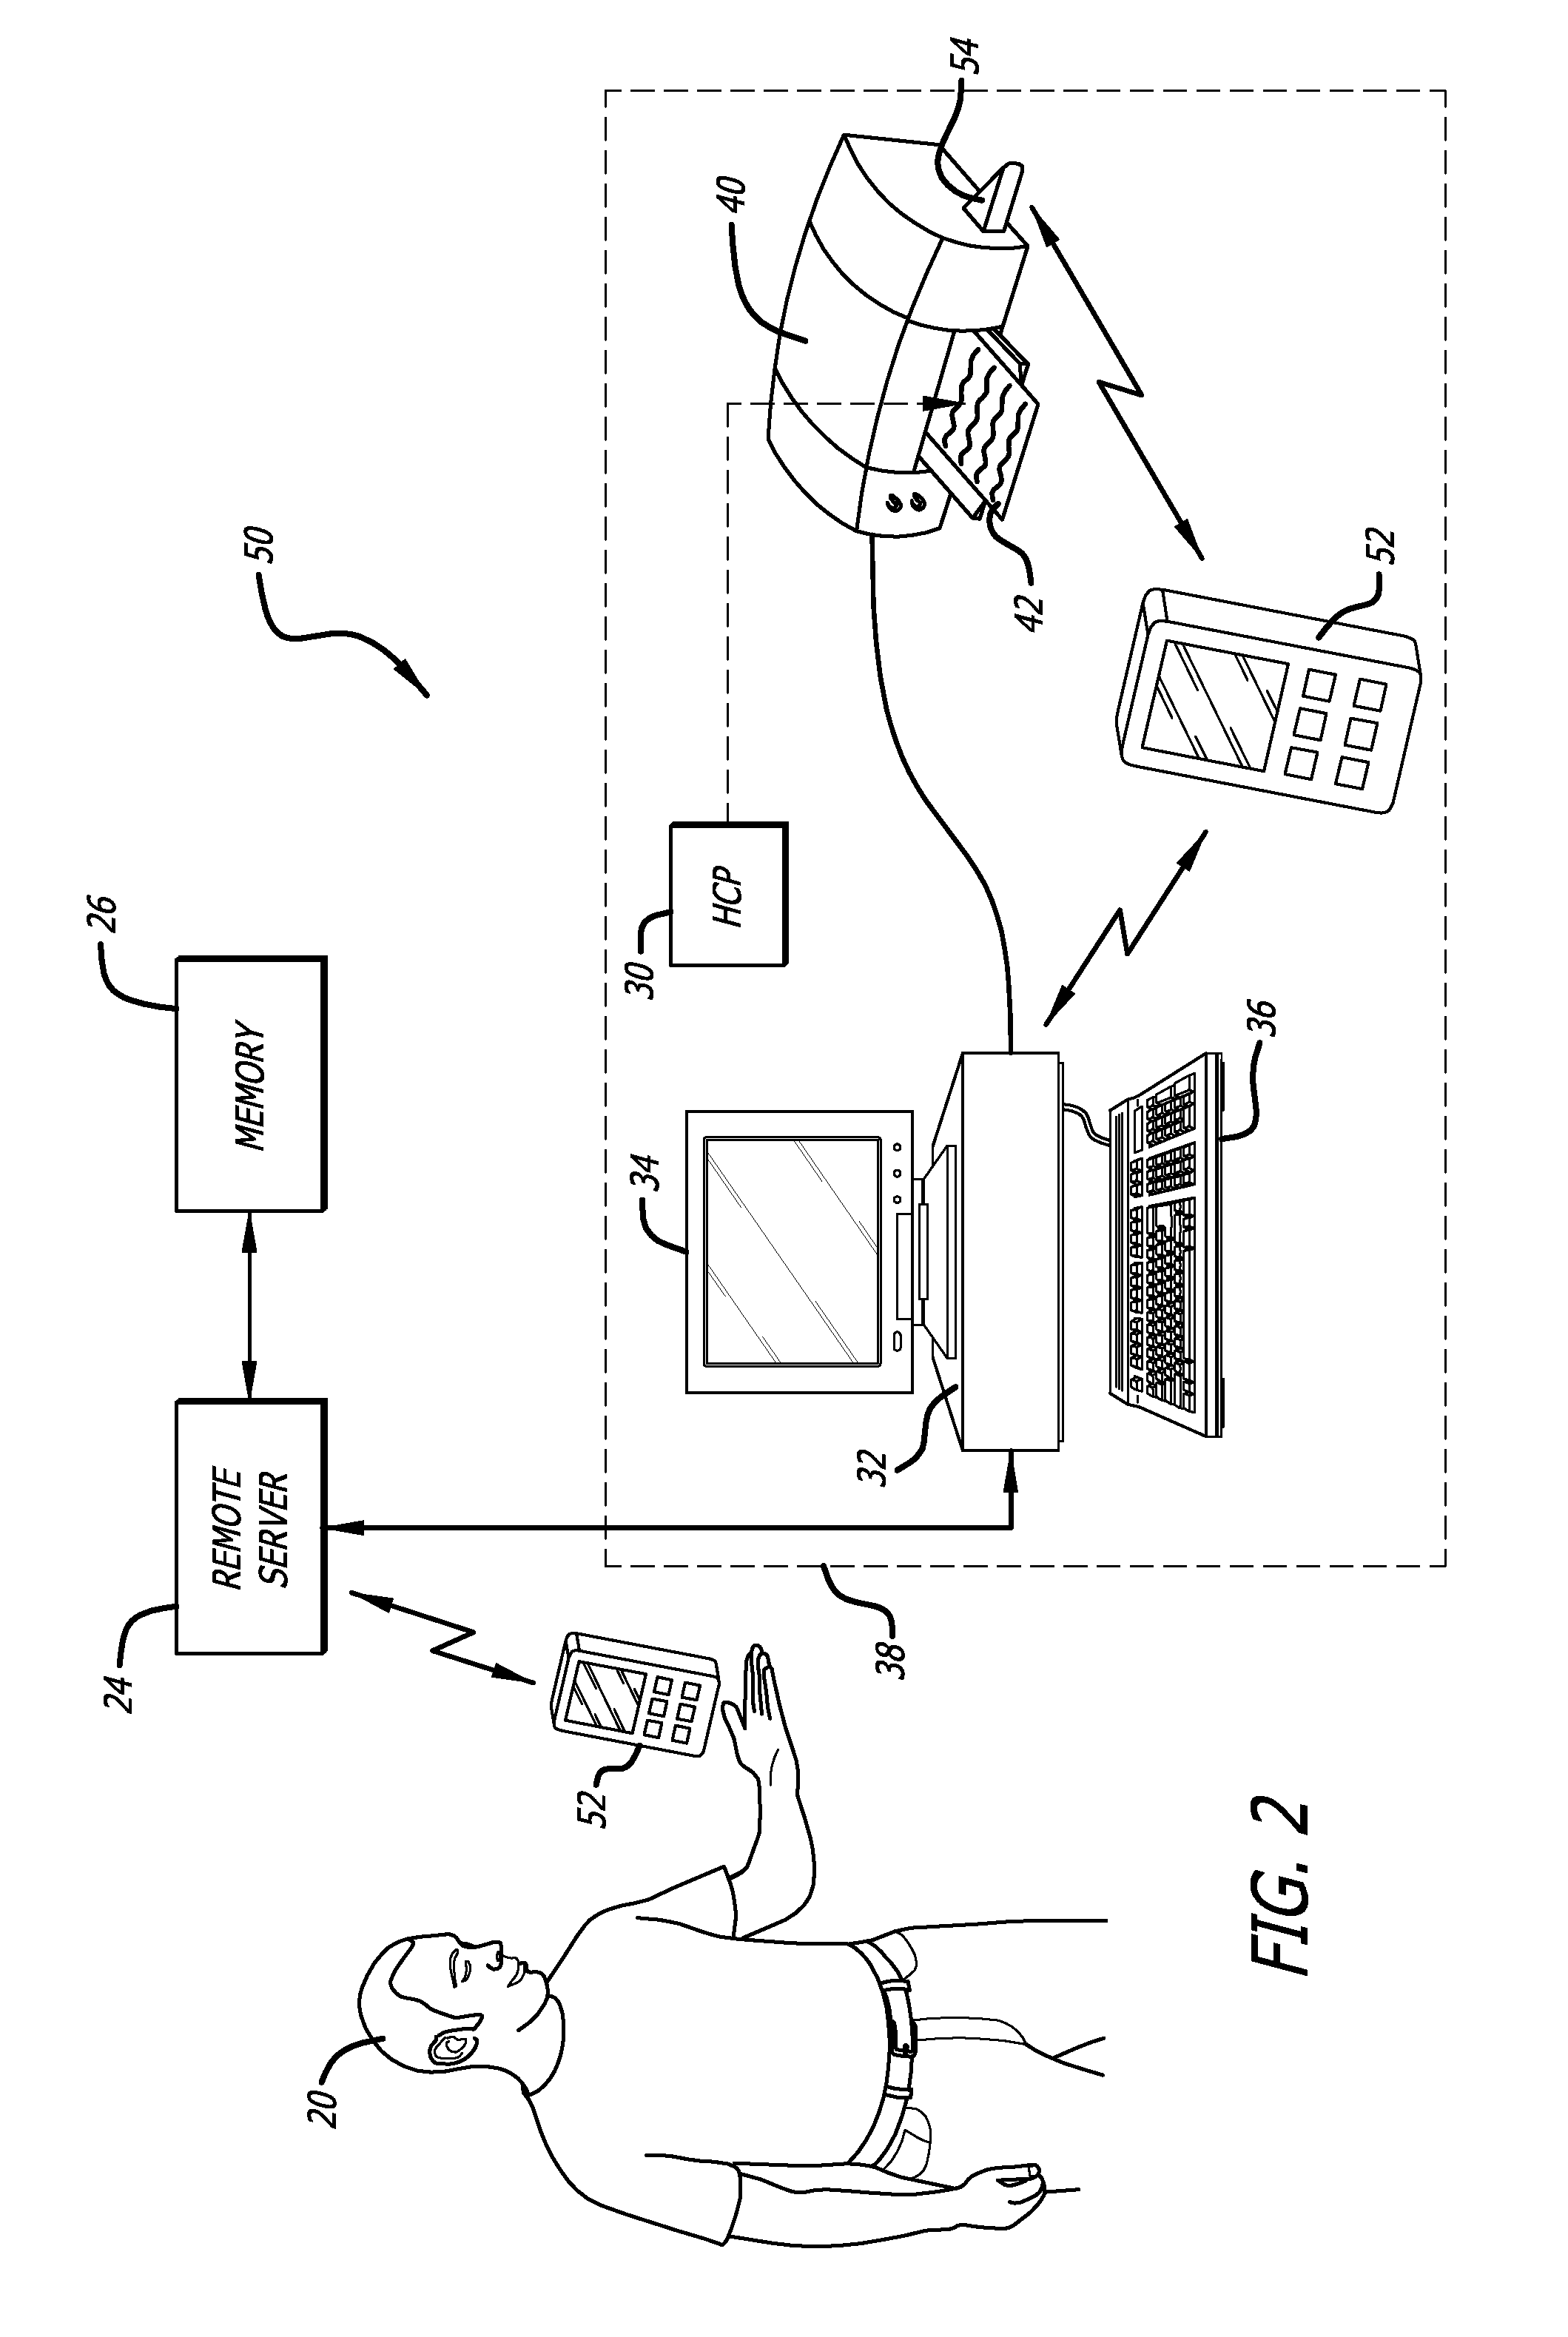 Method and system for analyte data transmission and report generation